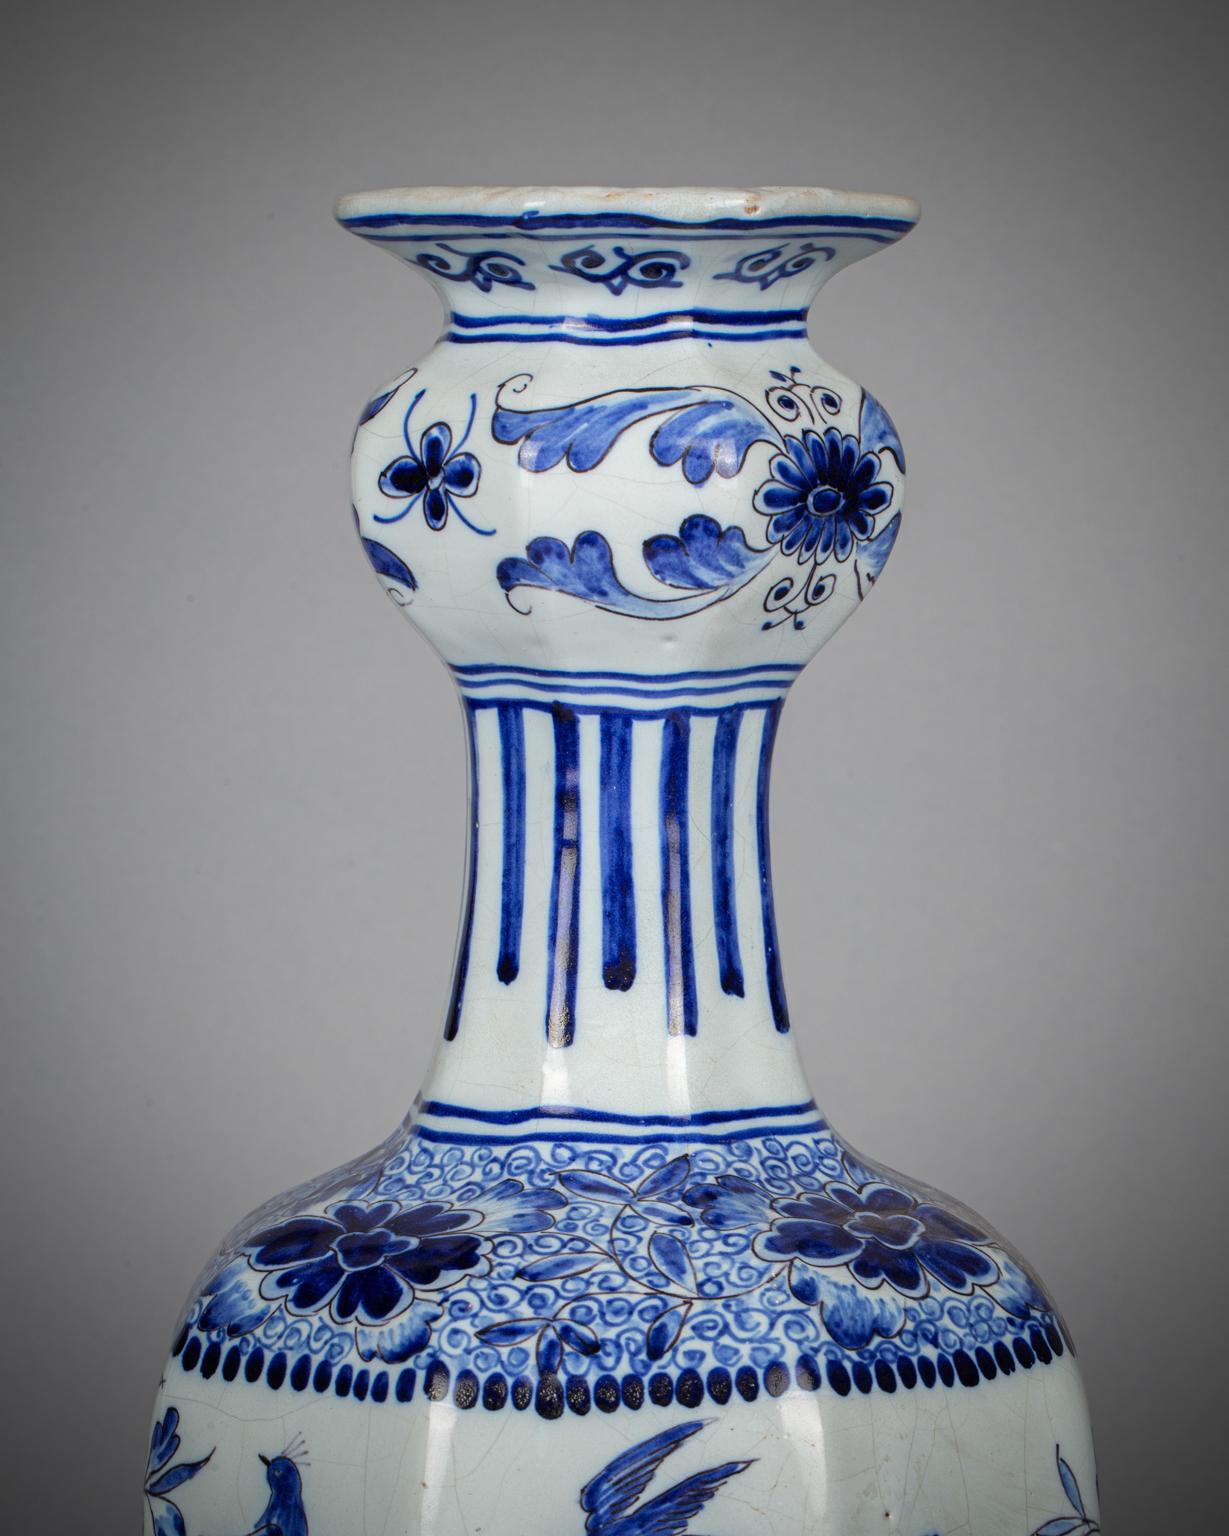 With vivid cobalt decoration in Chinoiserie style.